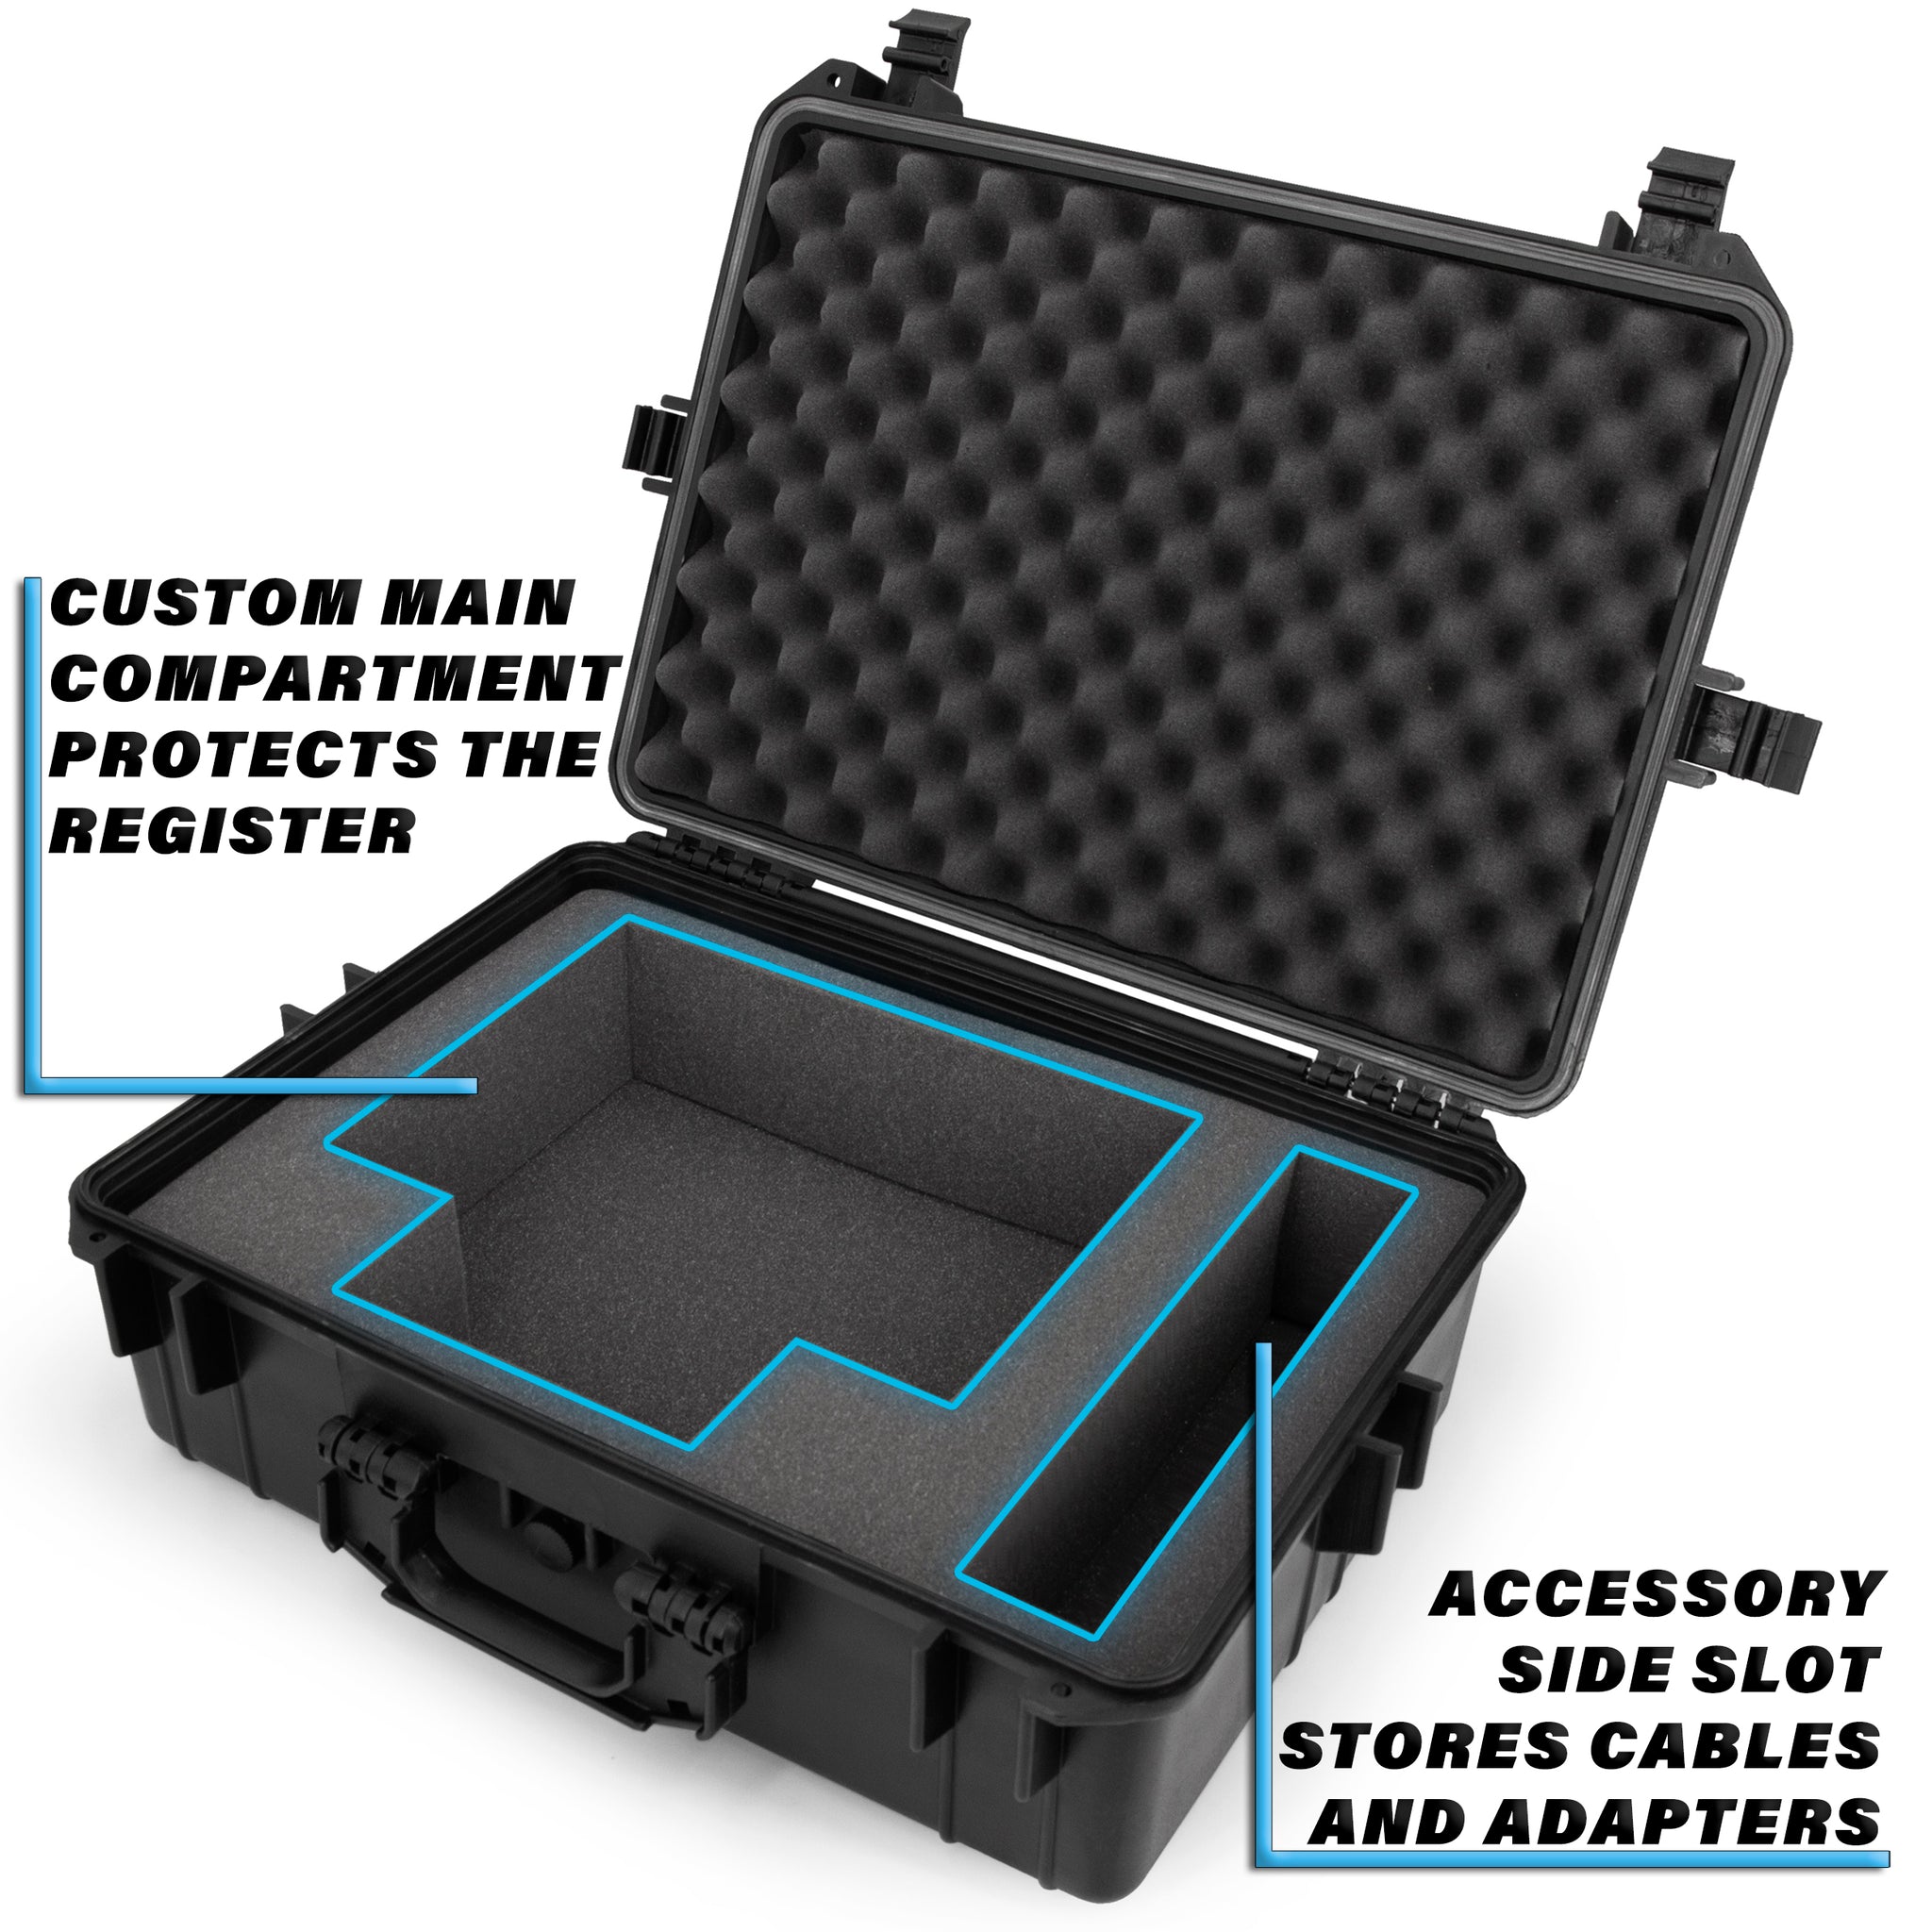 CASEMATIX Travel Carry Case Fits Square Terminal Reader, Square Terminal  Printer Paper and Accessories – Shoulder Strap, Water-Resistant